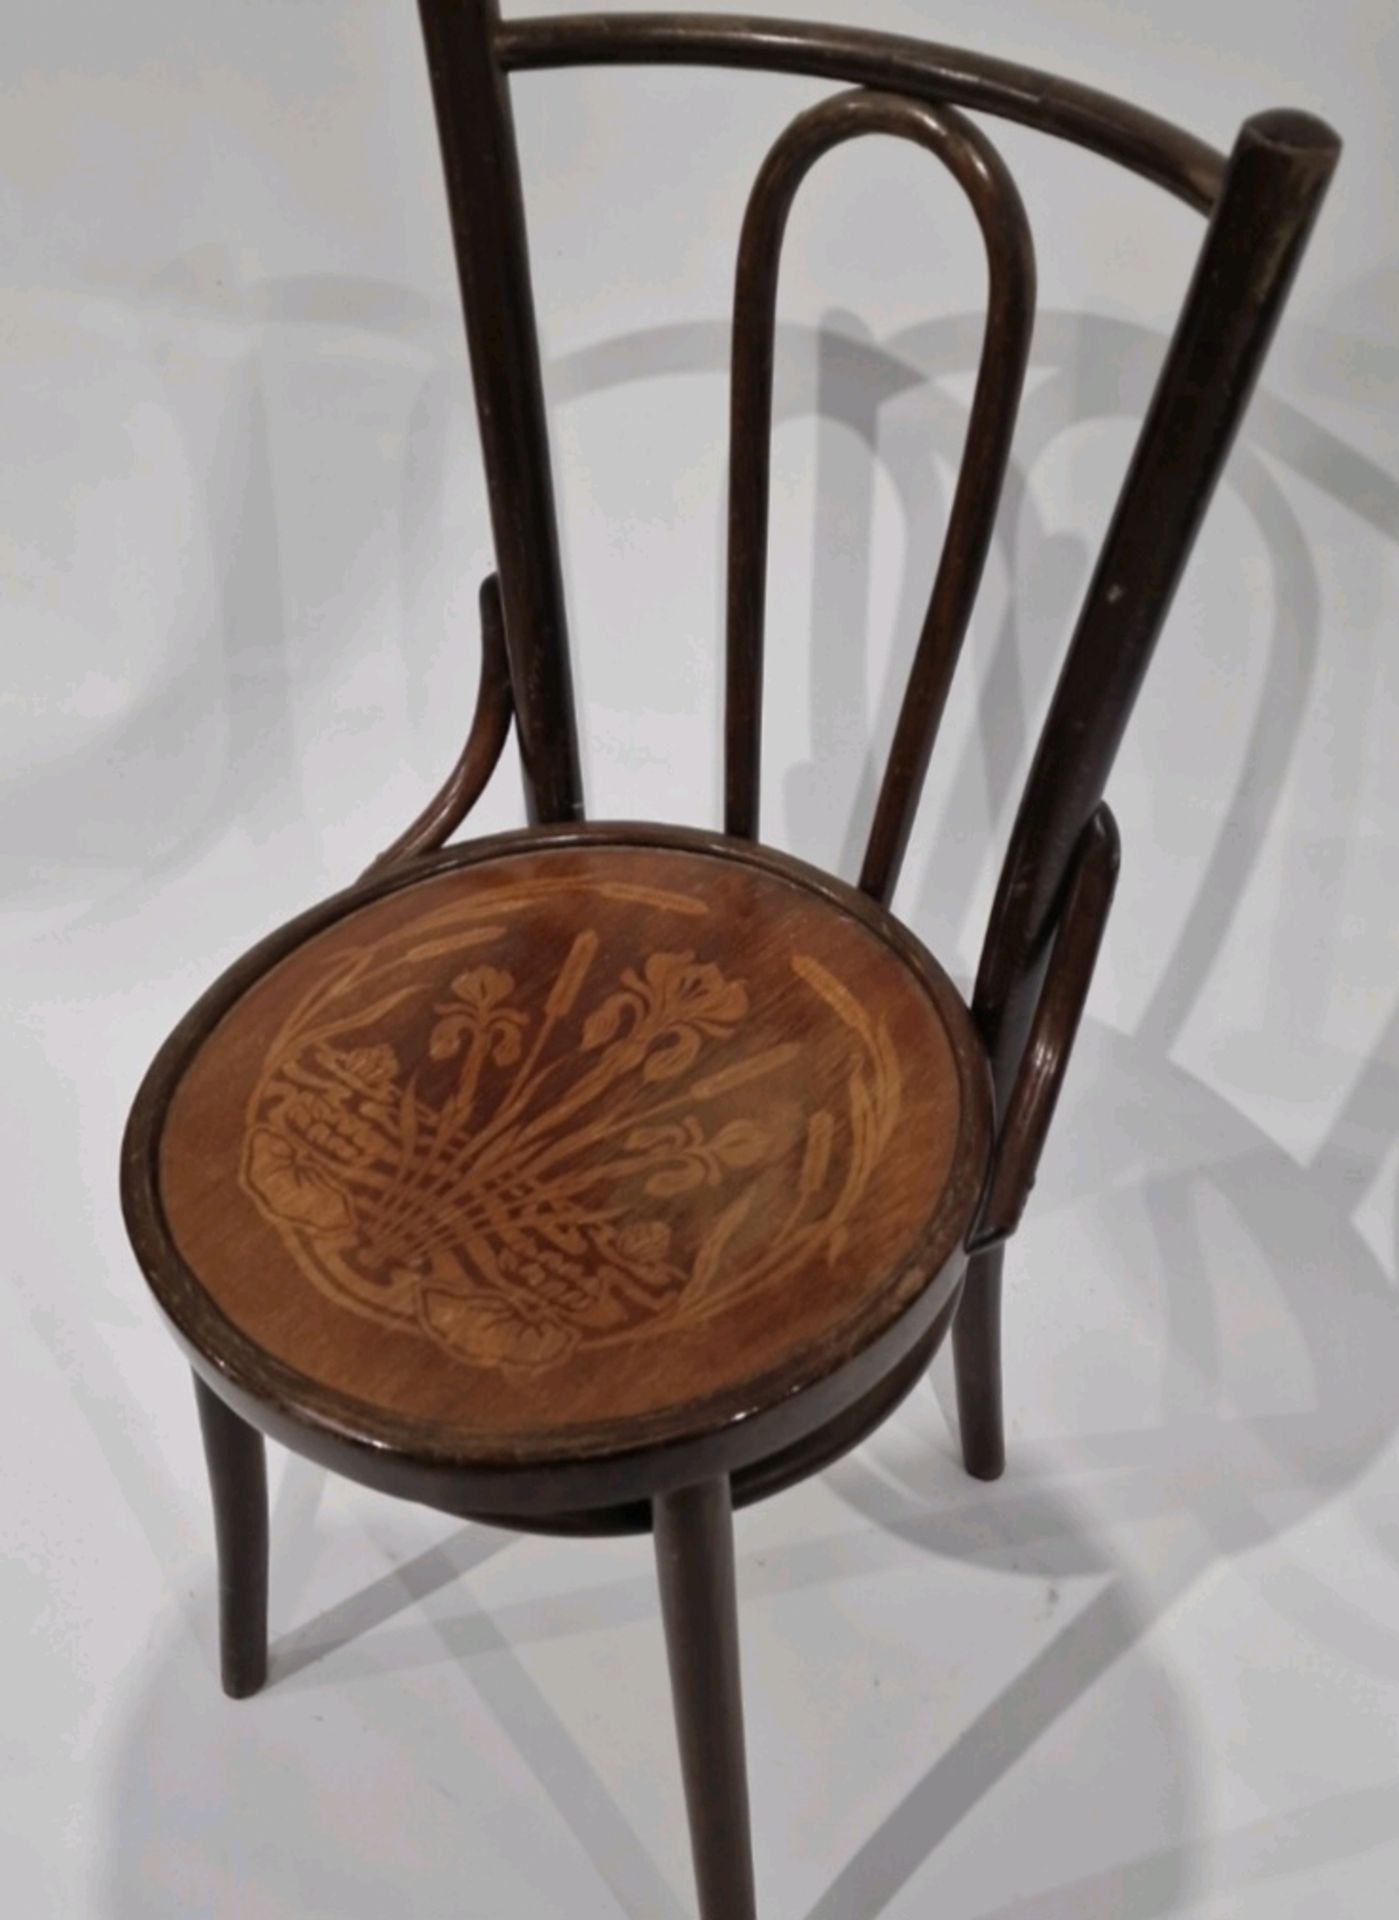 Decorative Bentwood Chair - Image 3 of 3